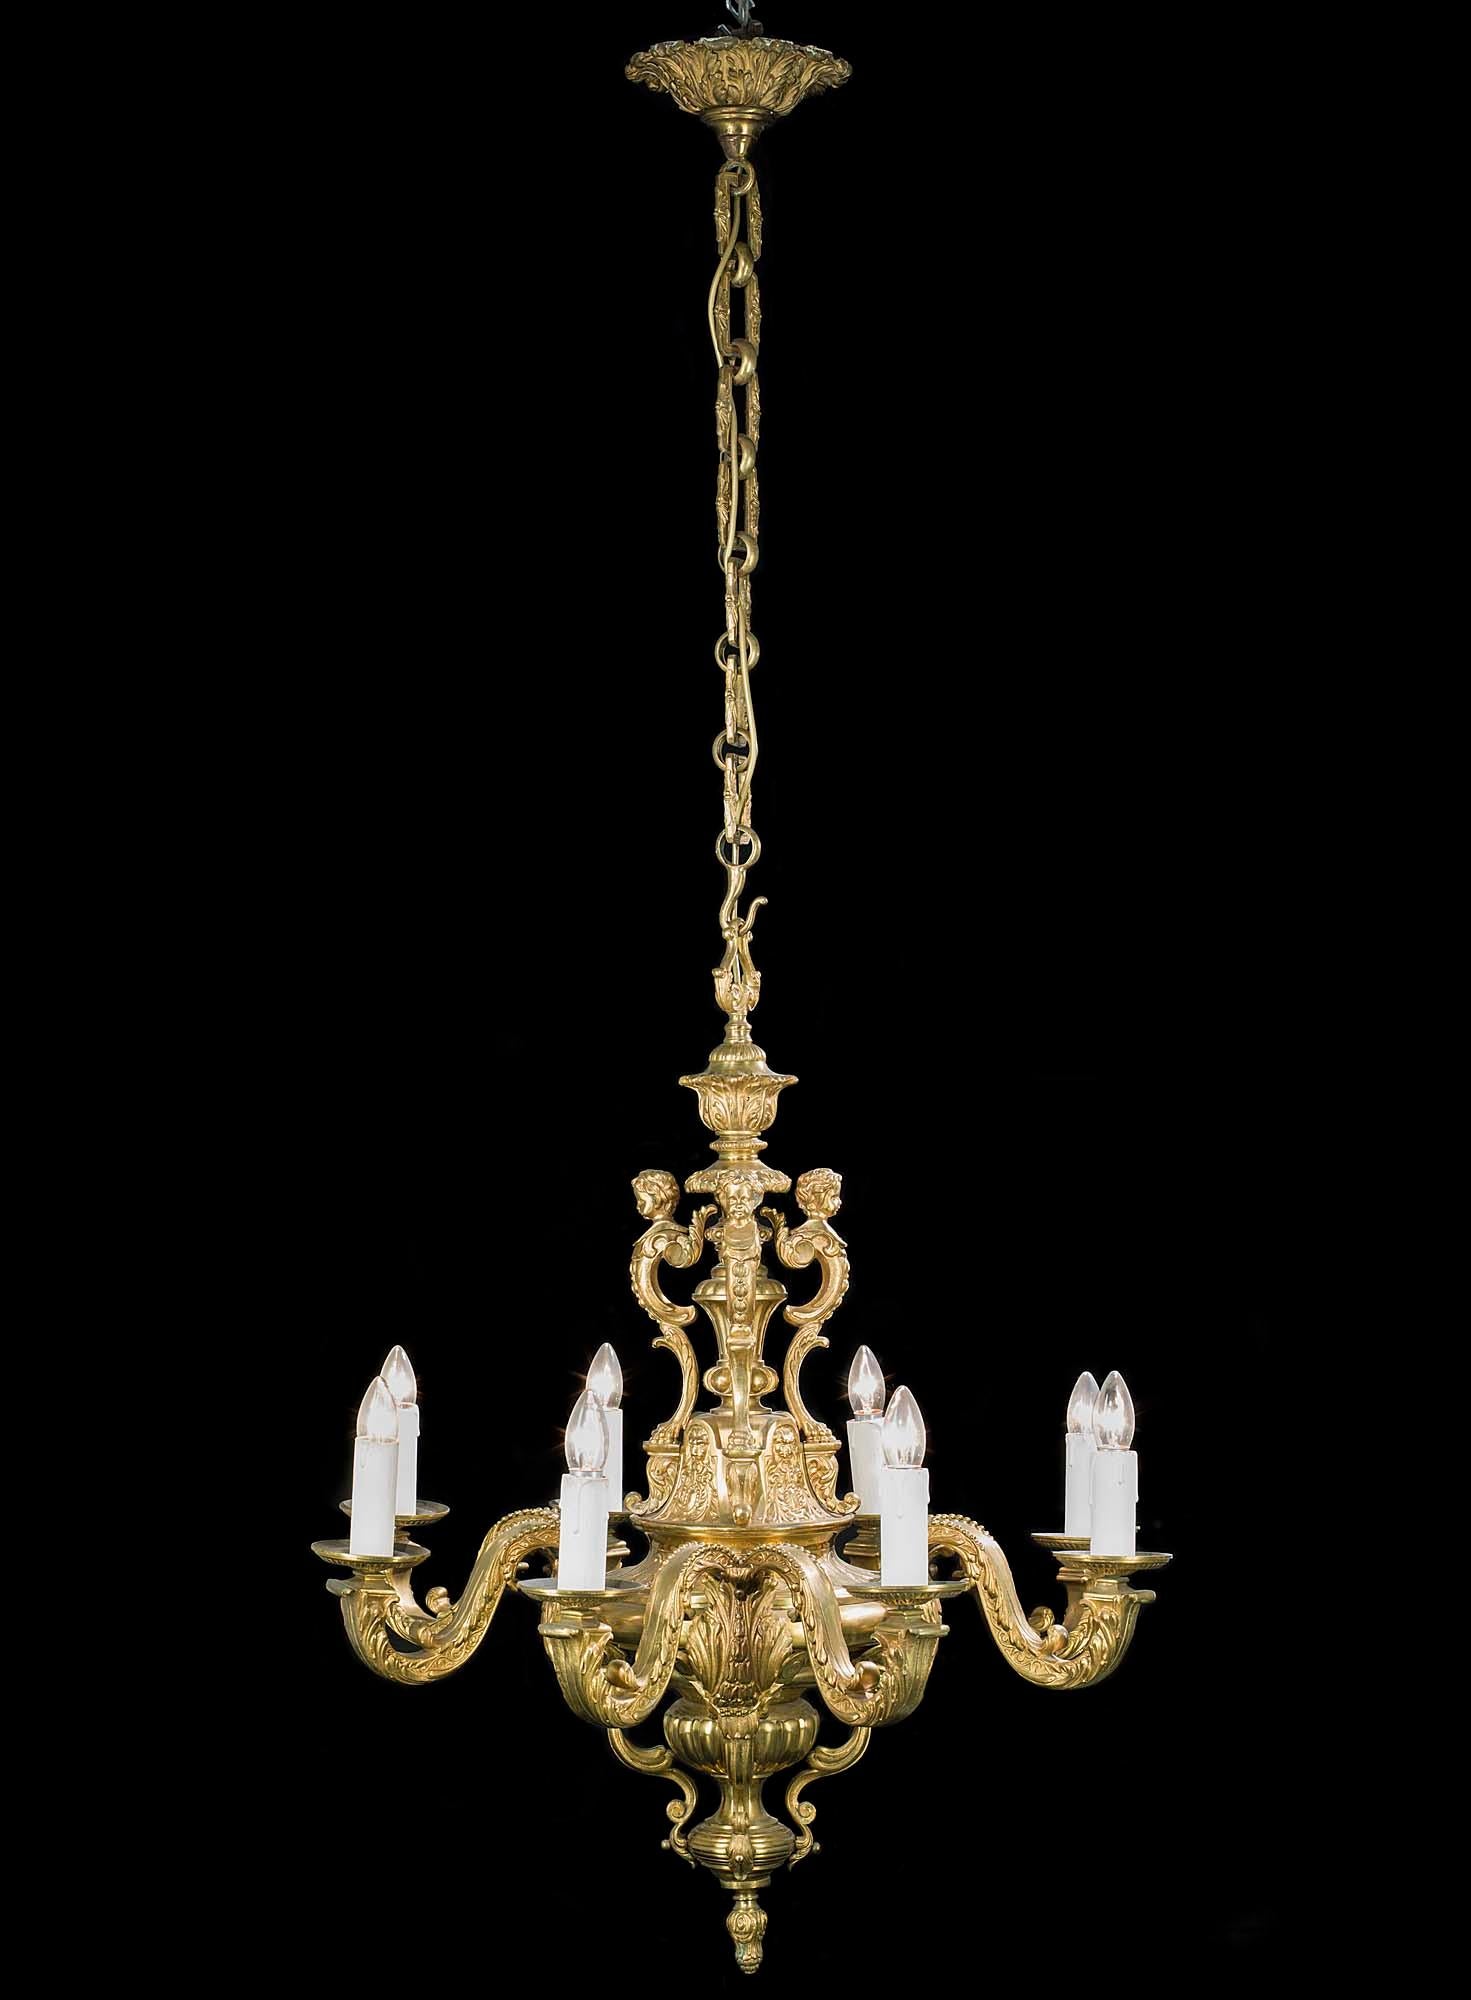 19th Century Large Eight Branch Victorian Baroque Style Antique Chandelier